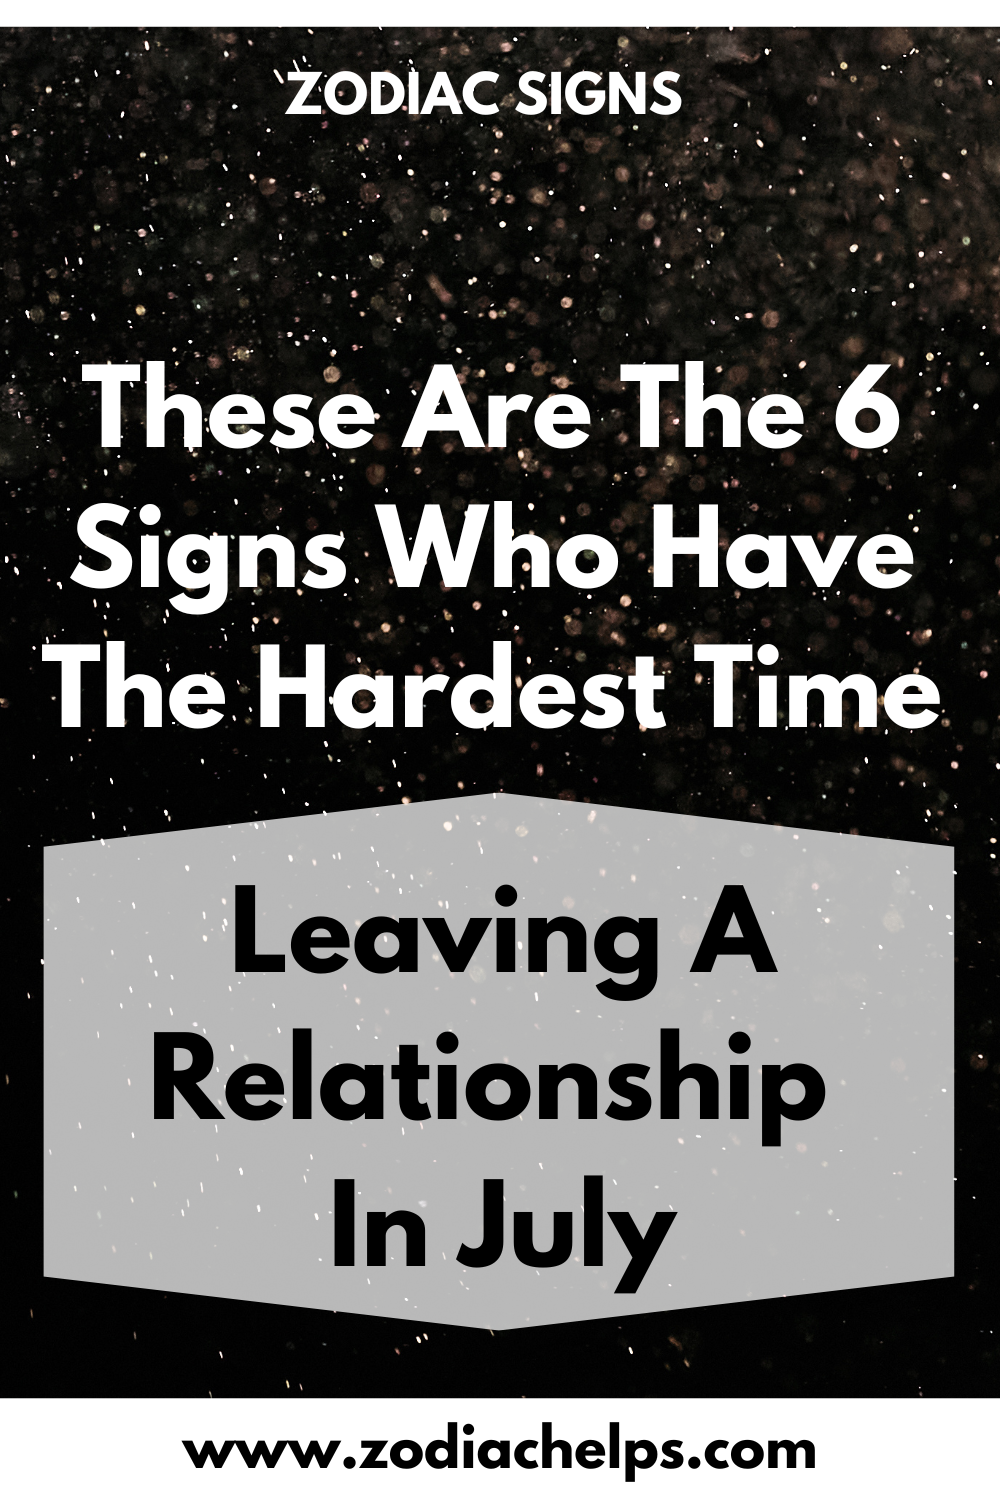 These Are The 6 Signs Who Have The Hardest Time Leaving A Relationship In July